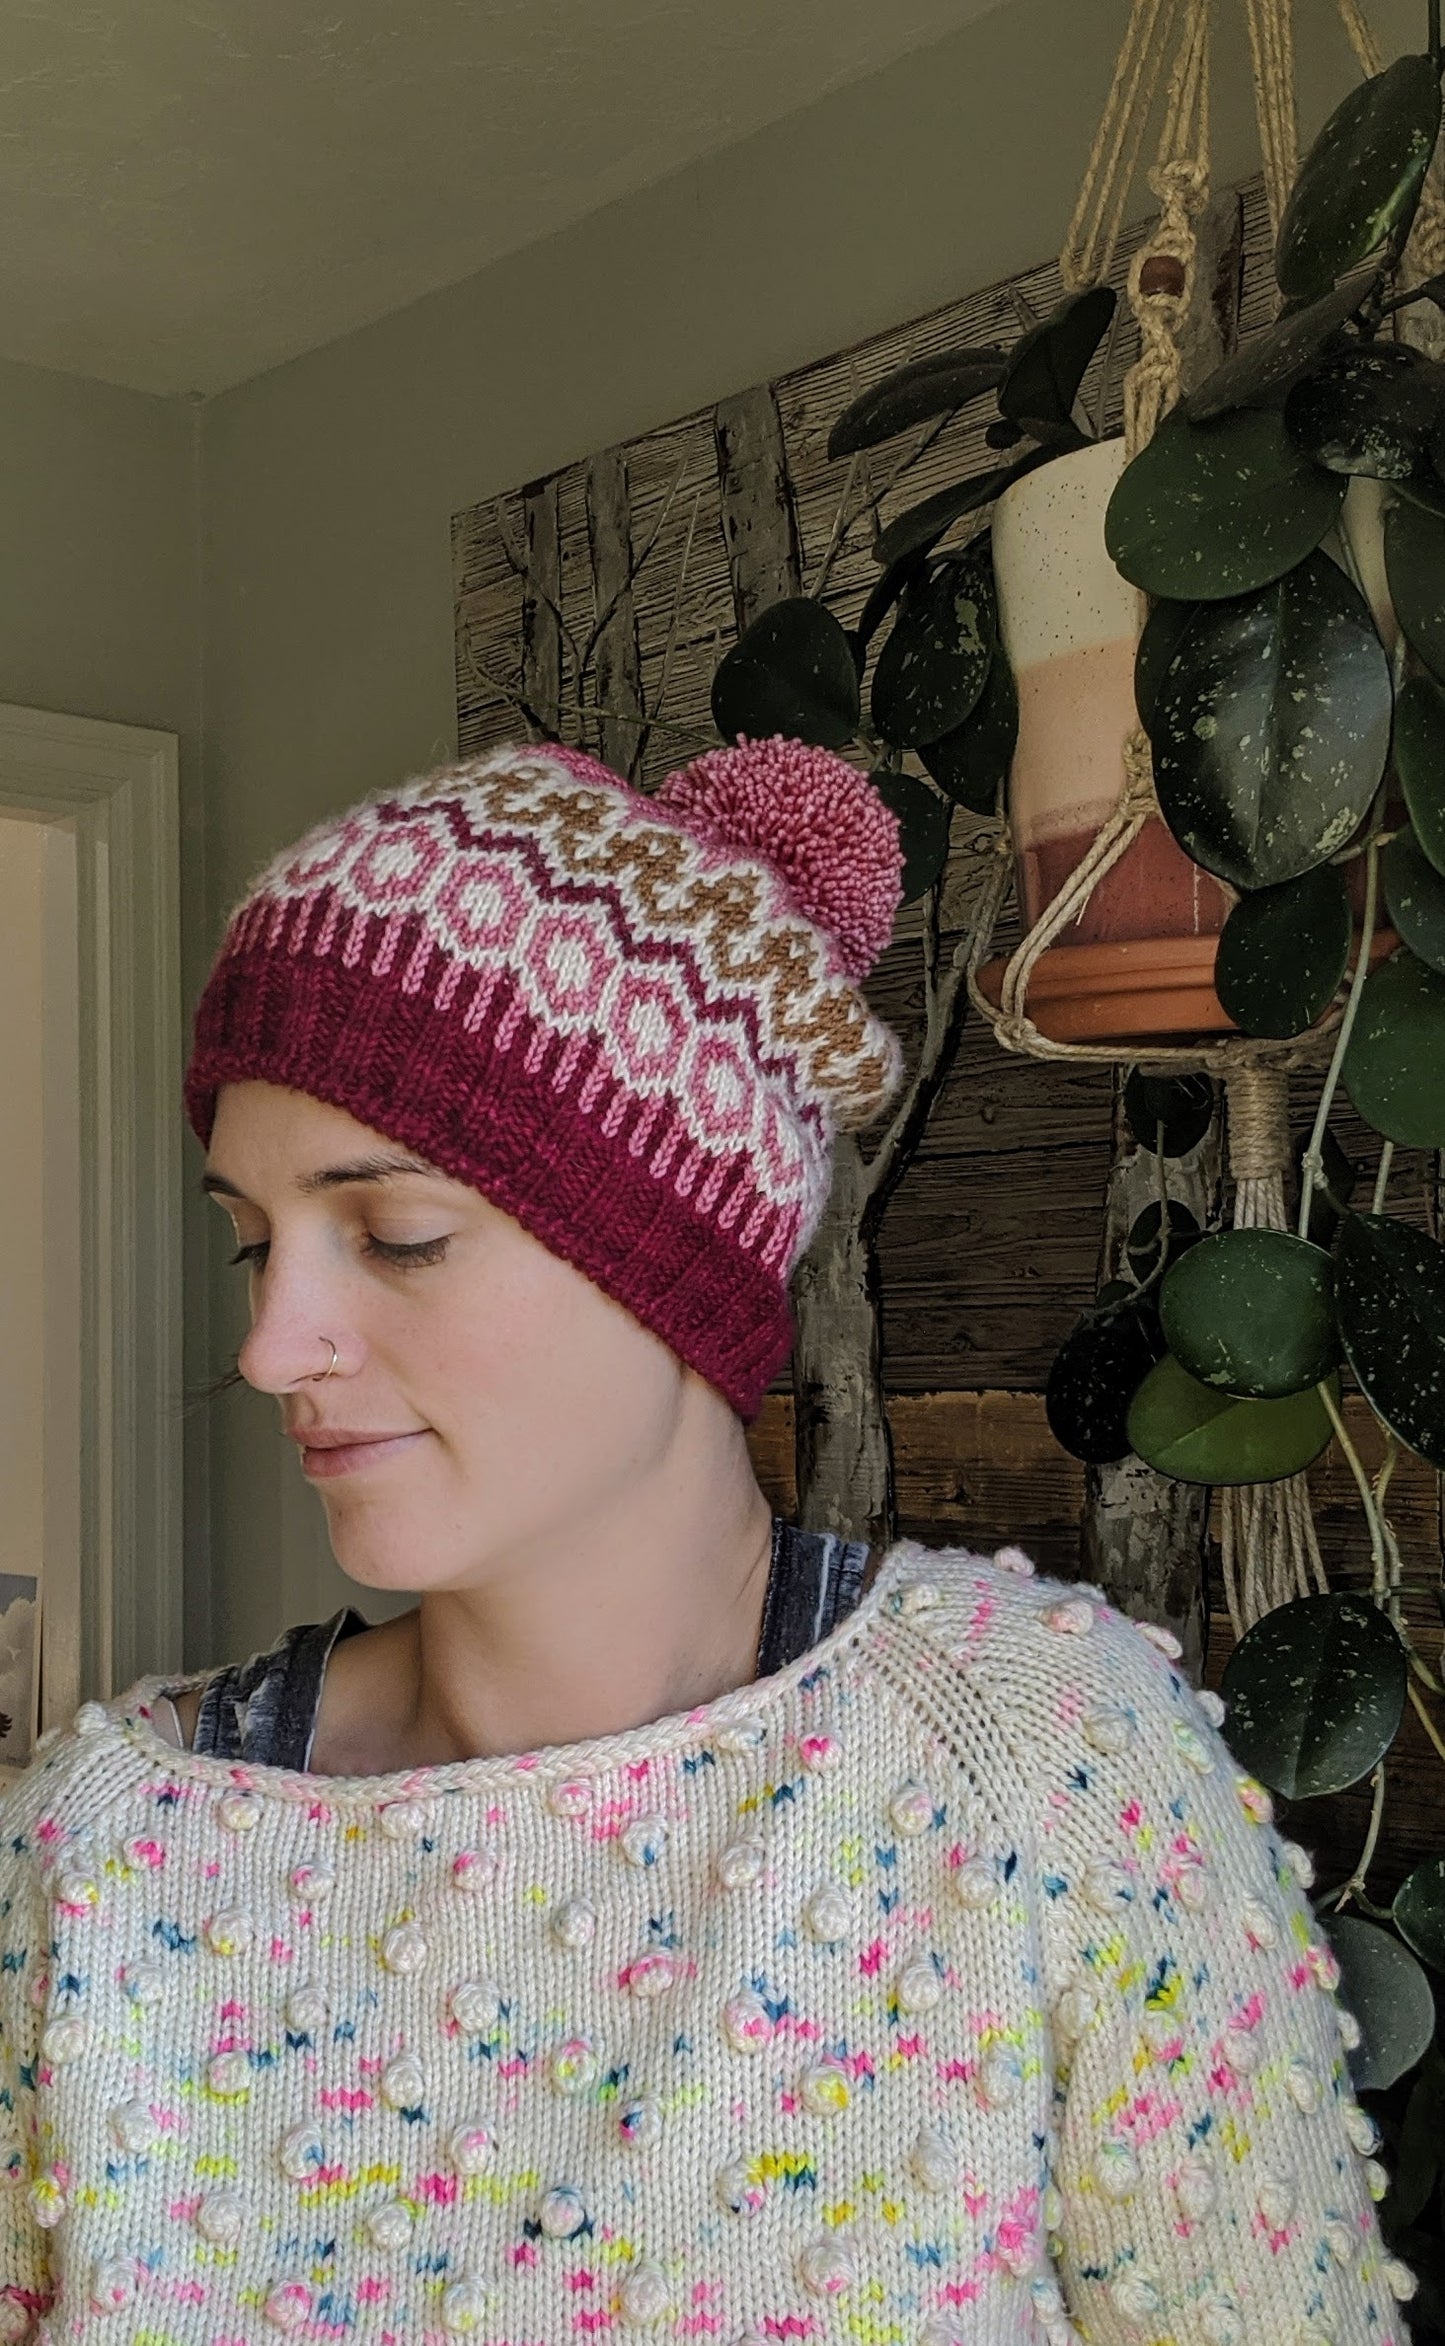 Jen wears a colorwork knit hat, made from dark pink, brown, white, light pink yarn with a bobble on top. Houseplants can be seen in the background.